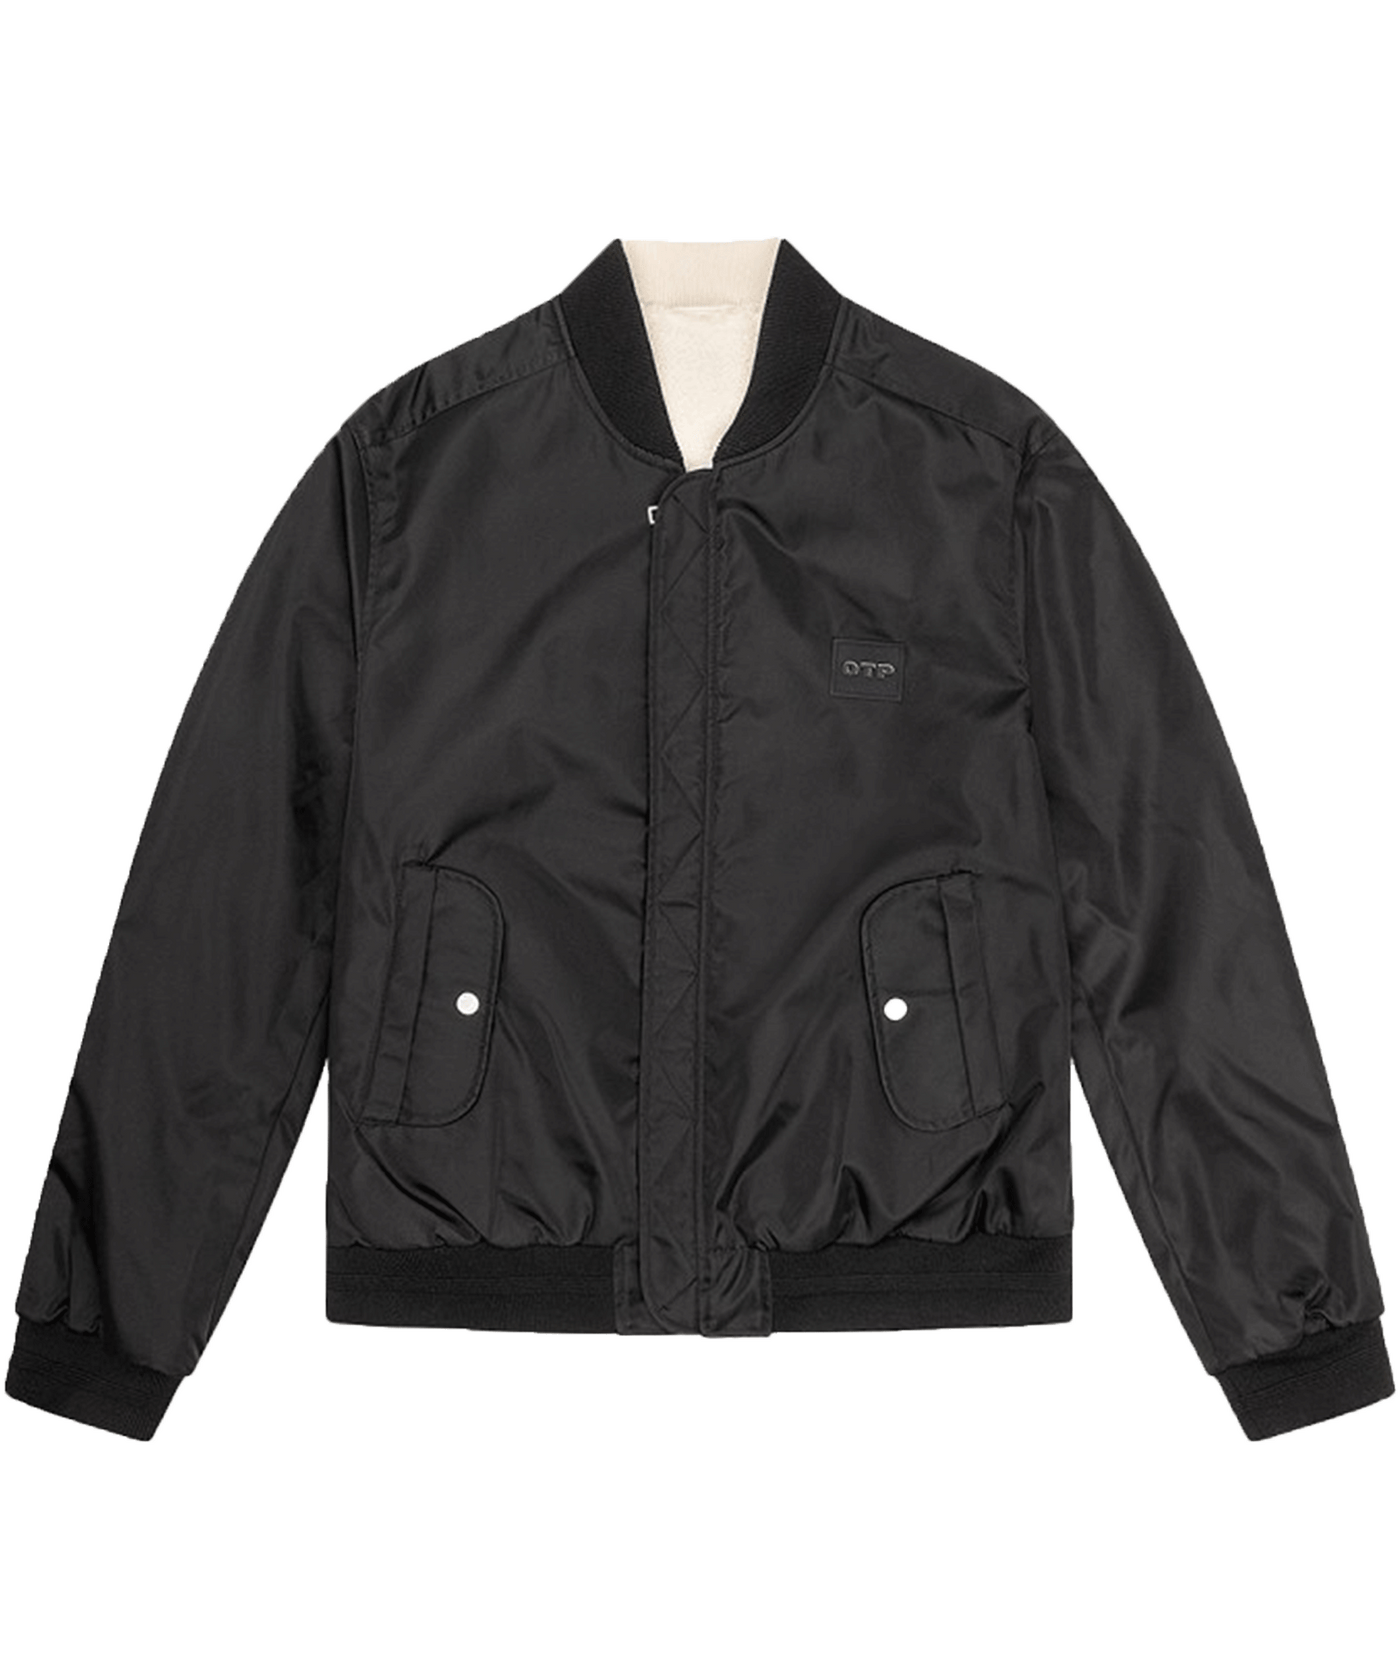 Off The Pitch - Otp233080 - Reversible Jacket - 998 Black